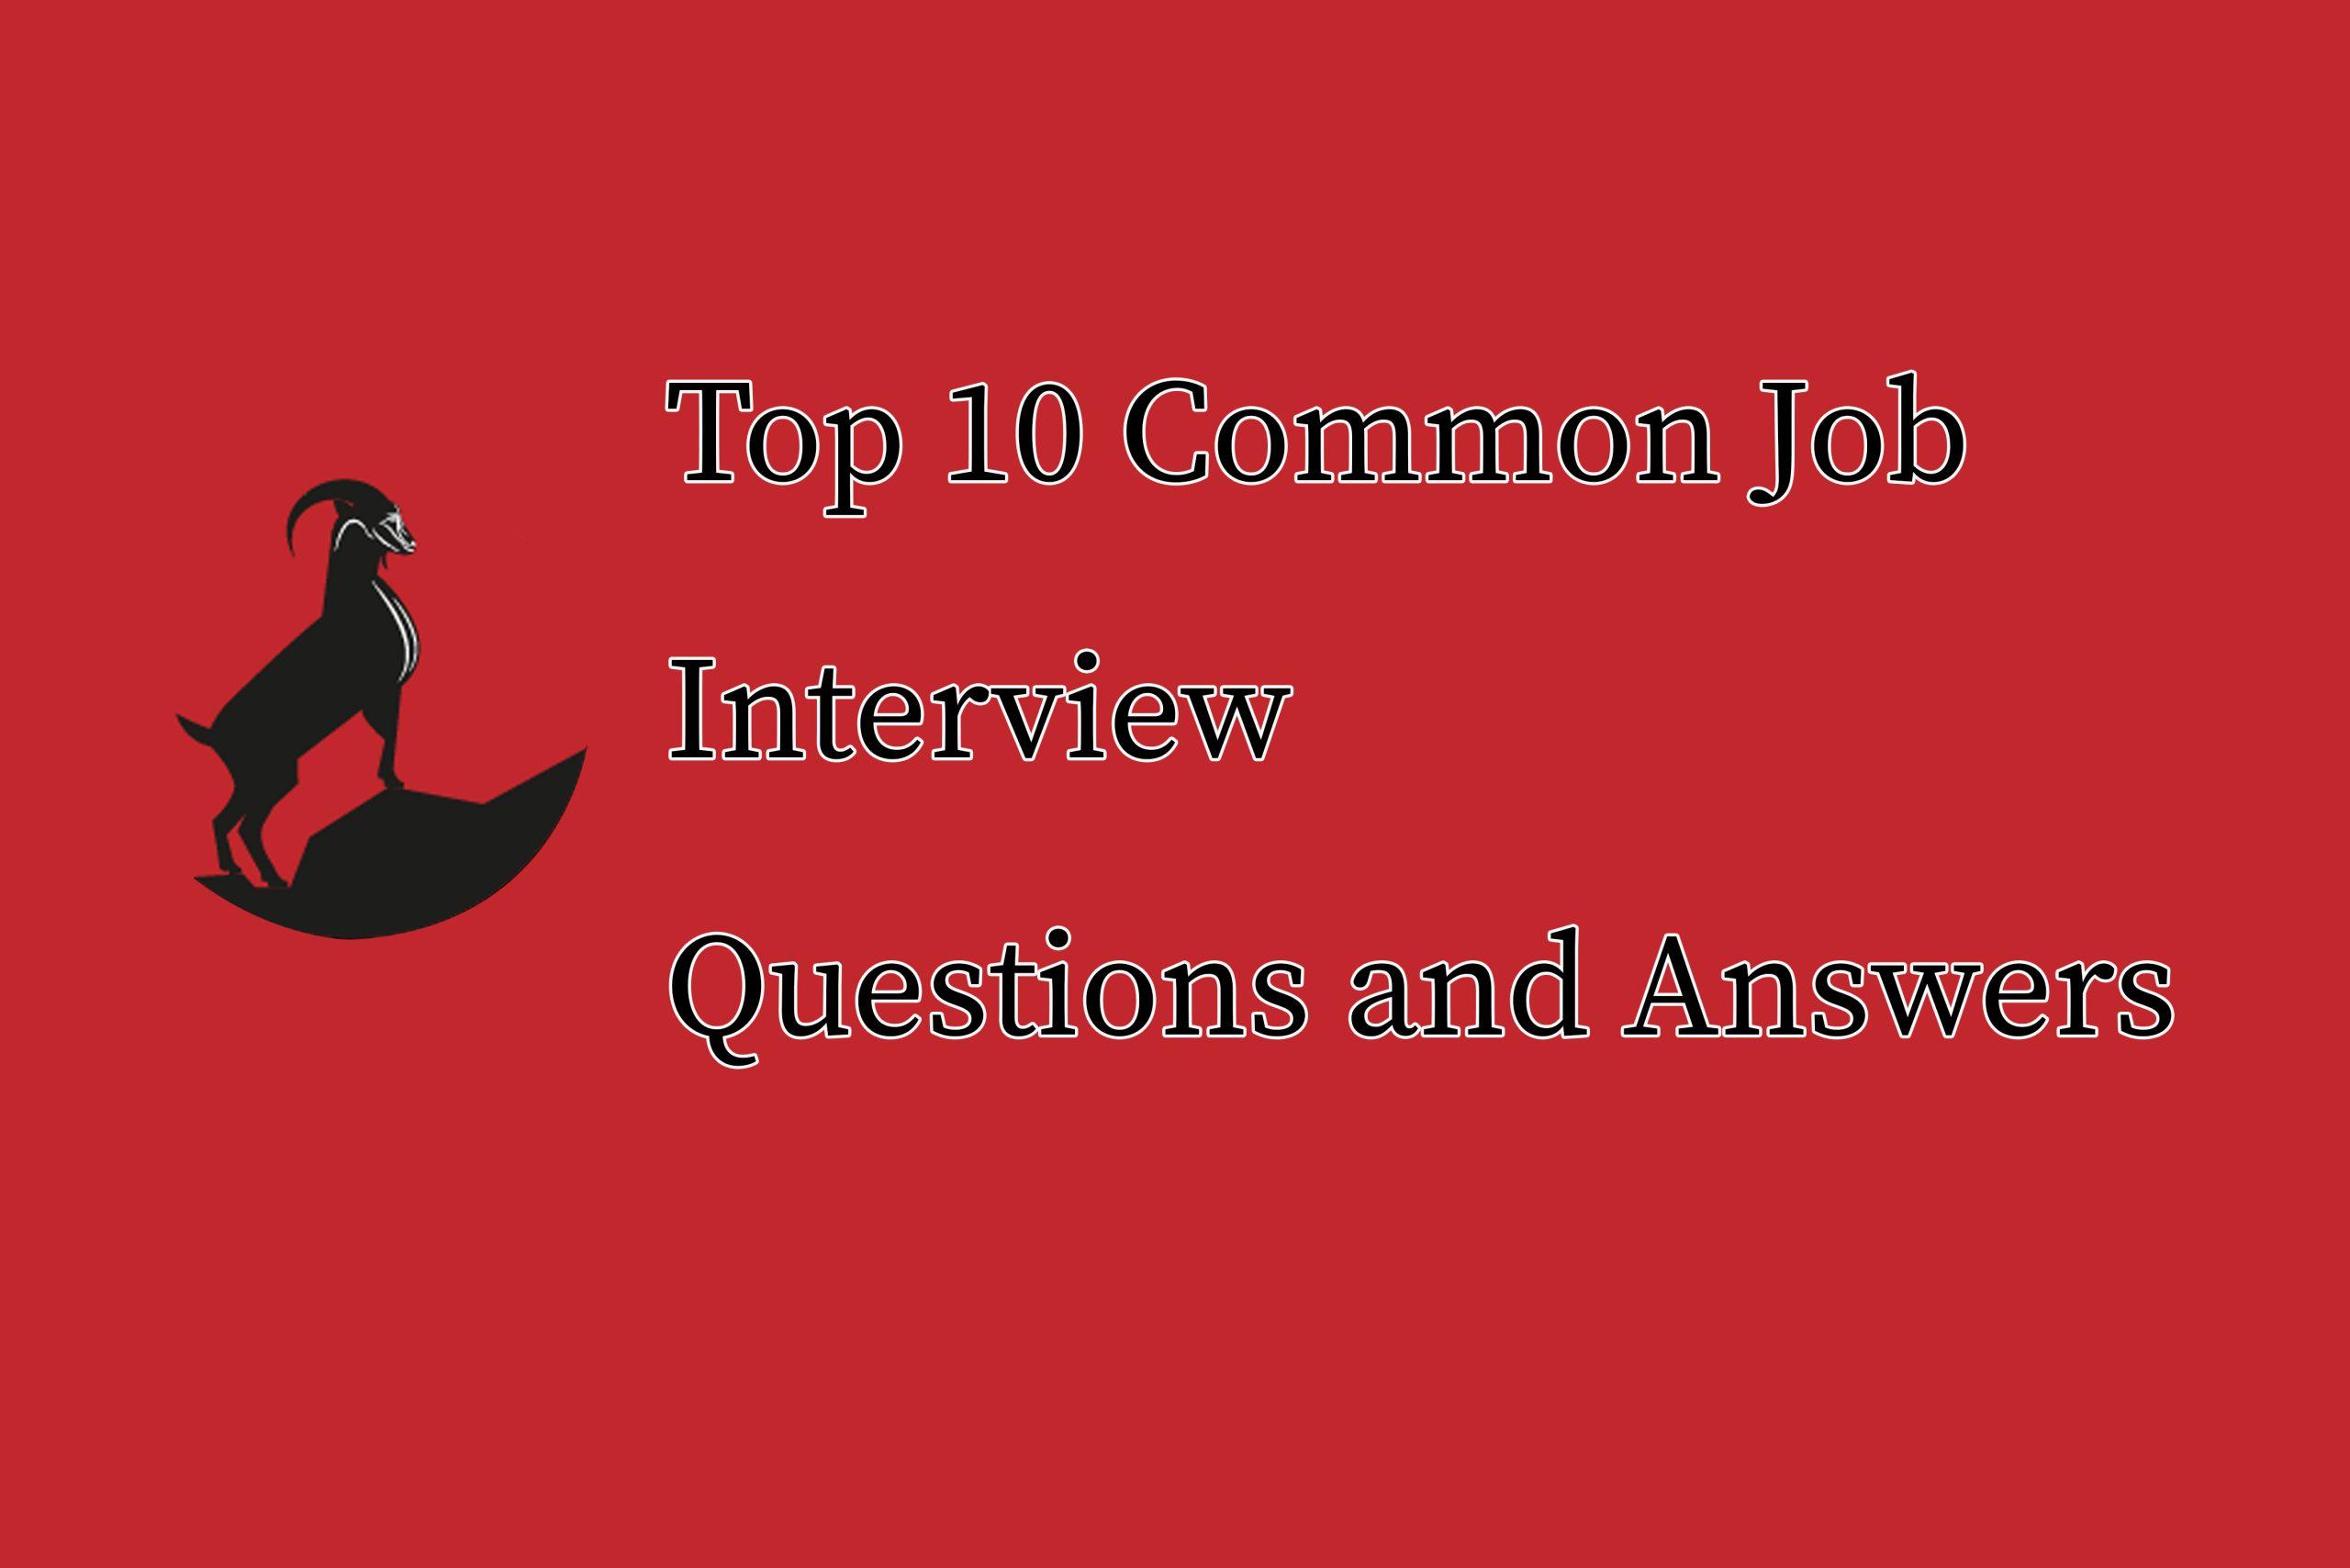 Top 10 Common Job Interview Questions and Answers